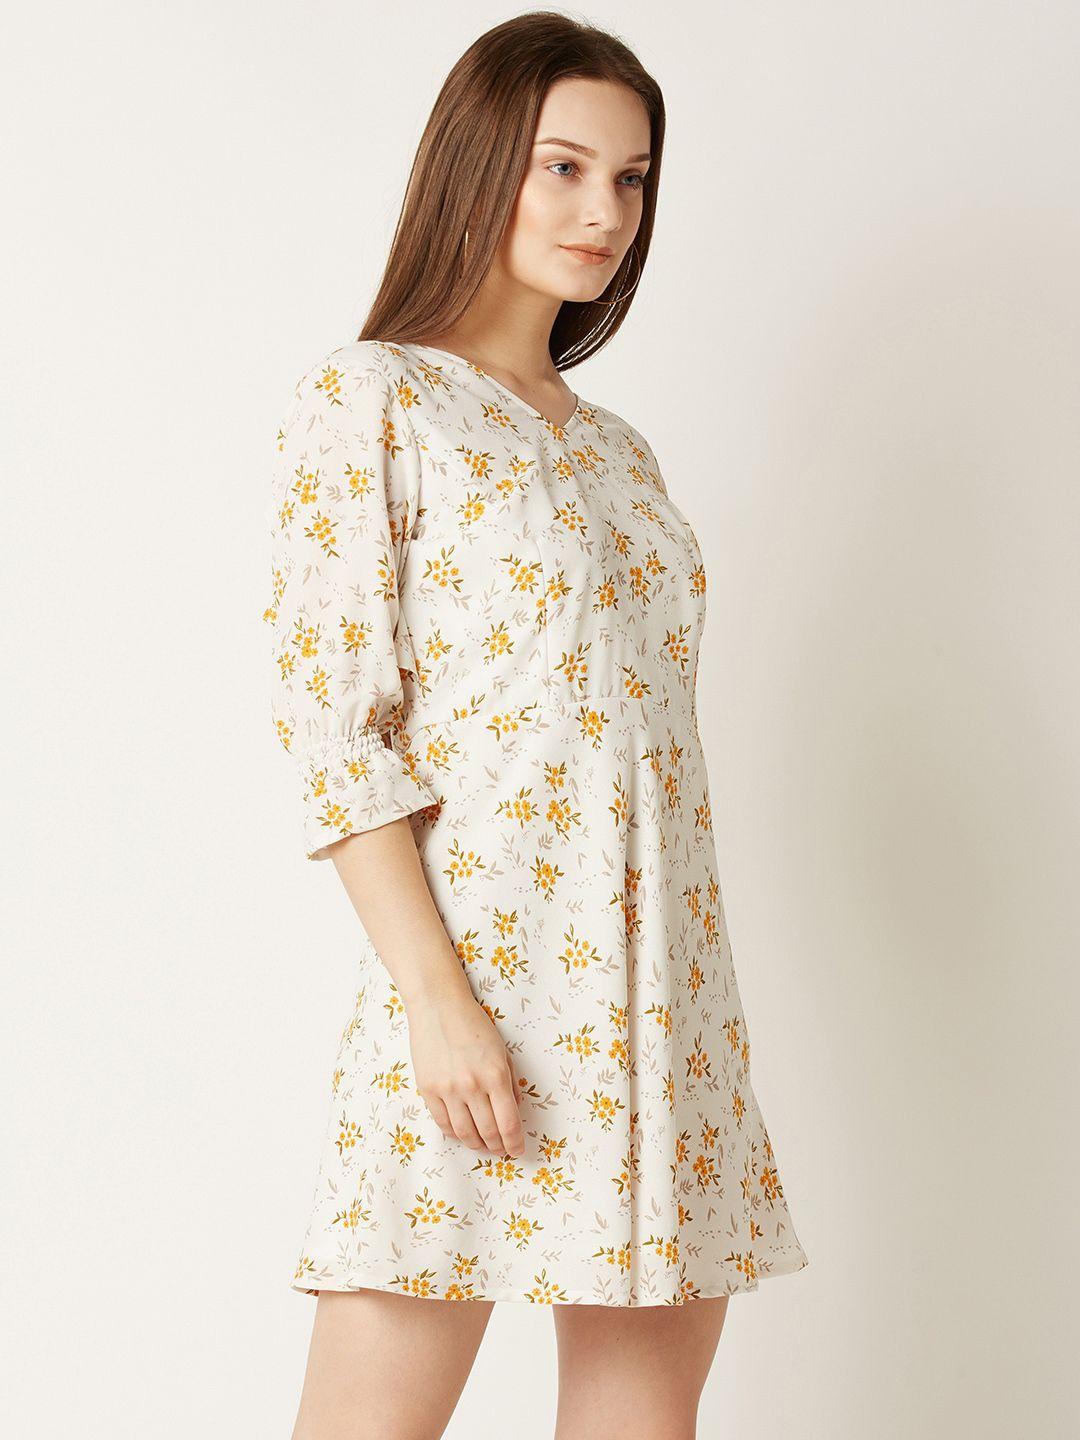 miss-chase-women-off-white-&-yellow-printed-fit-&-flare-dress